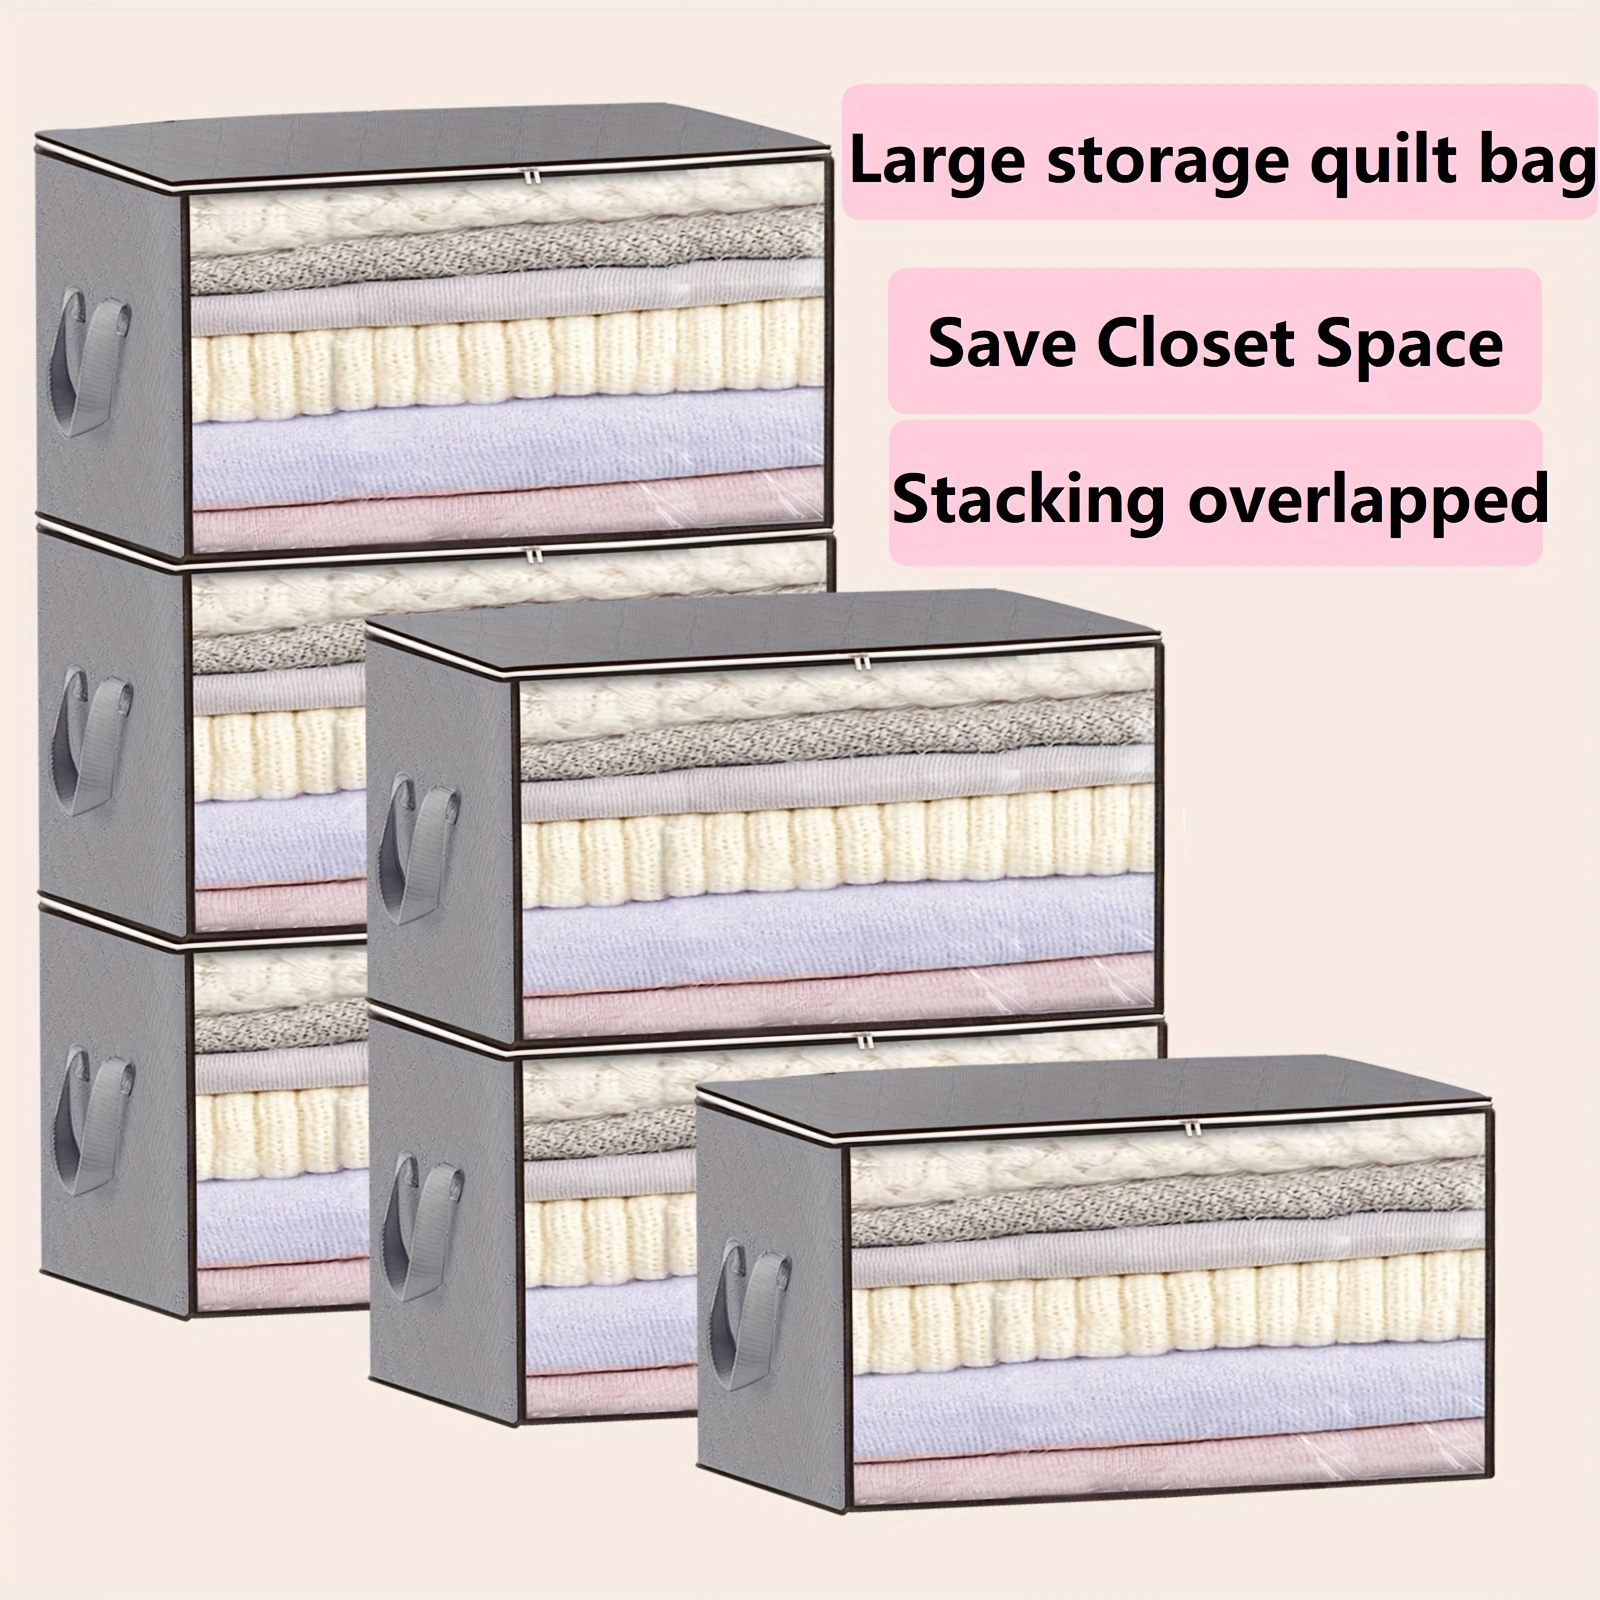 

3pcs Large Capacity Storage Bags With Clear Window, Foldable Quilt Organizer For Closet, Dust-proof Clothes Packing Bag For Moving, Dormitory, And Renting Spaces